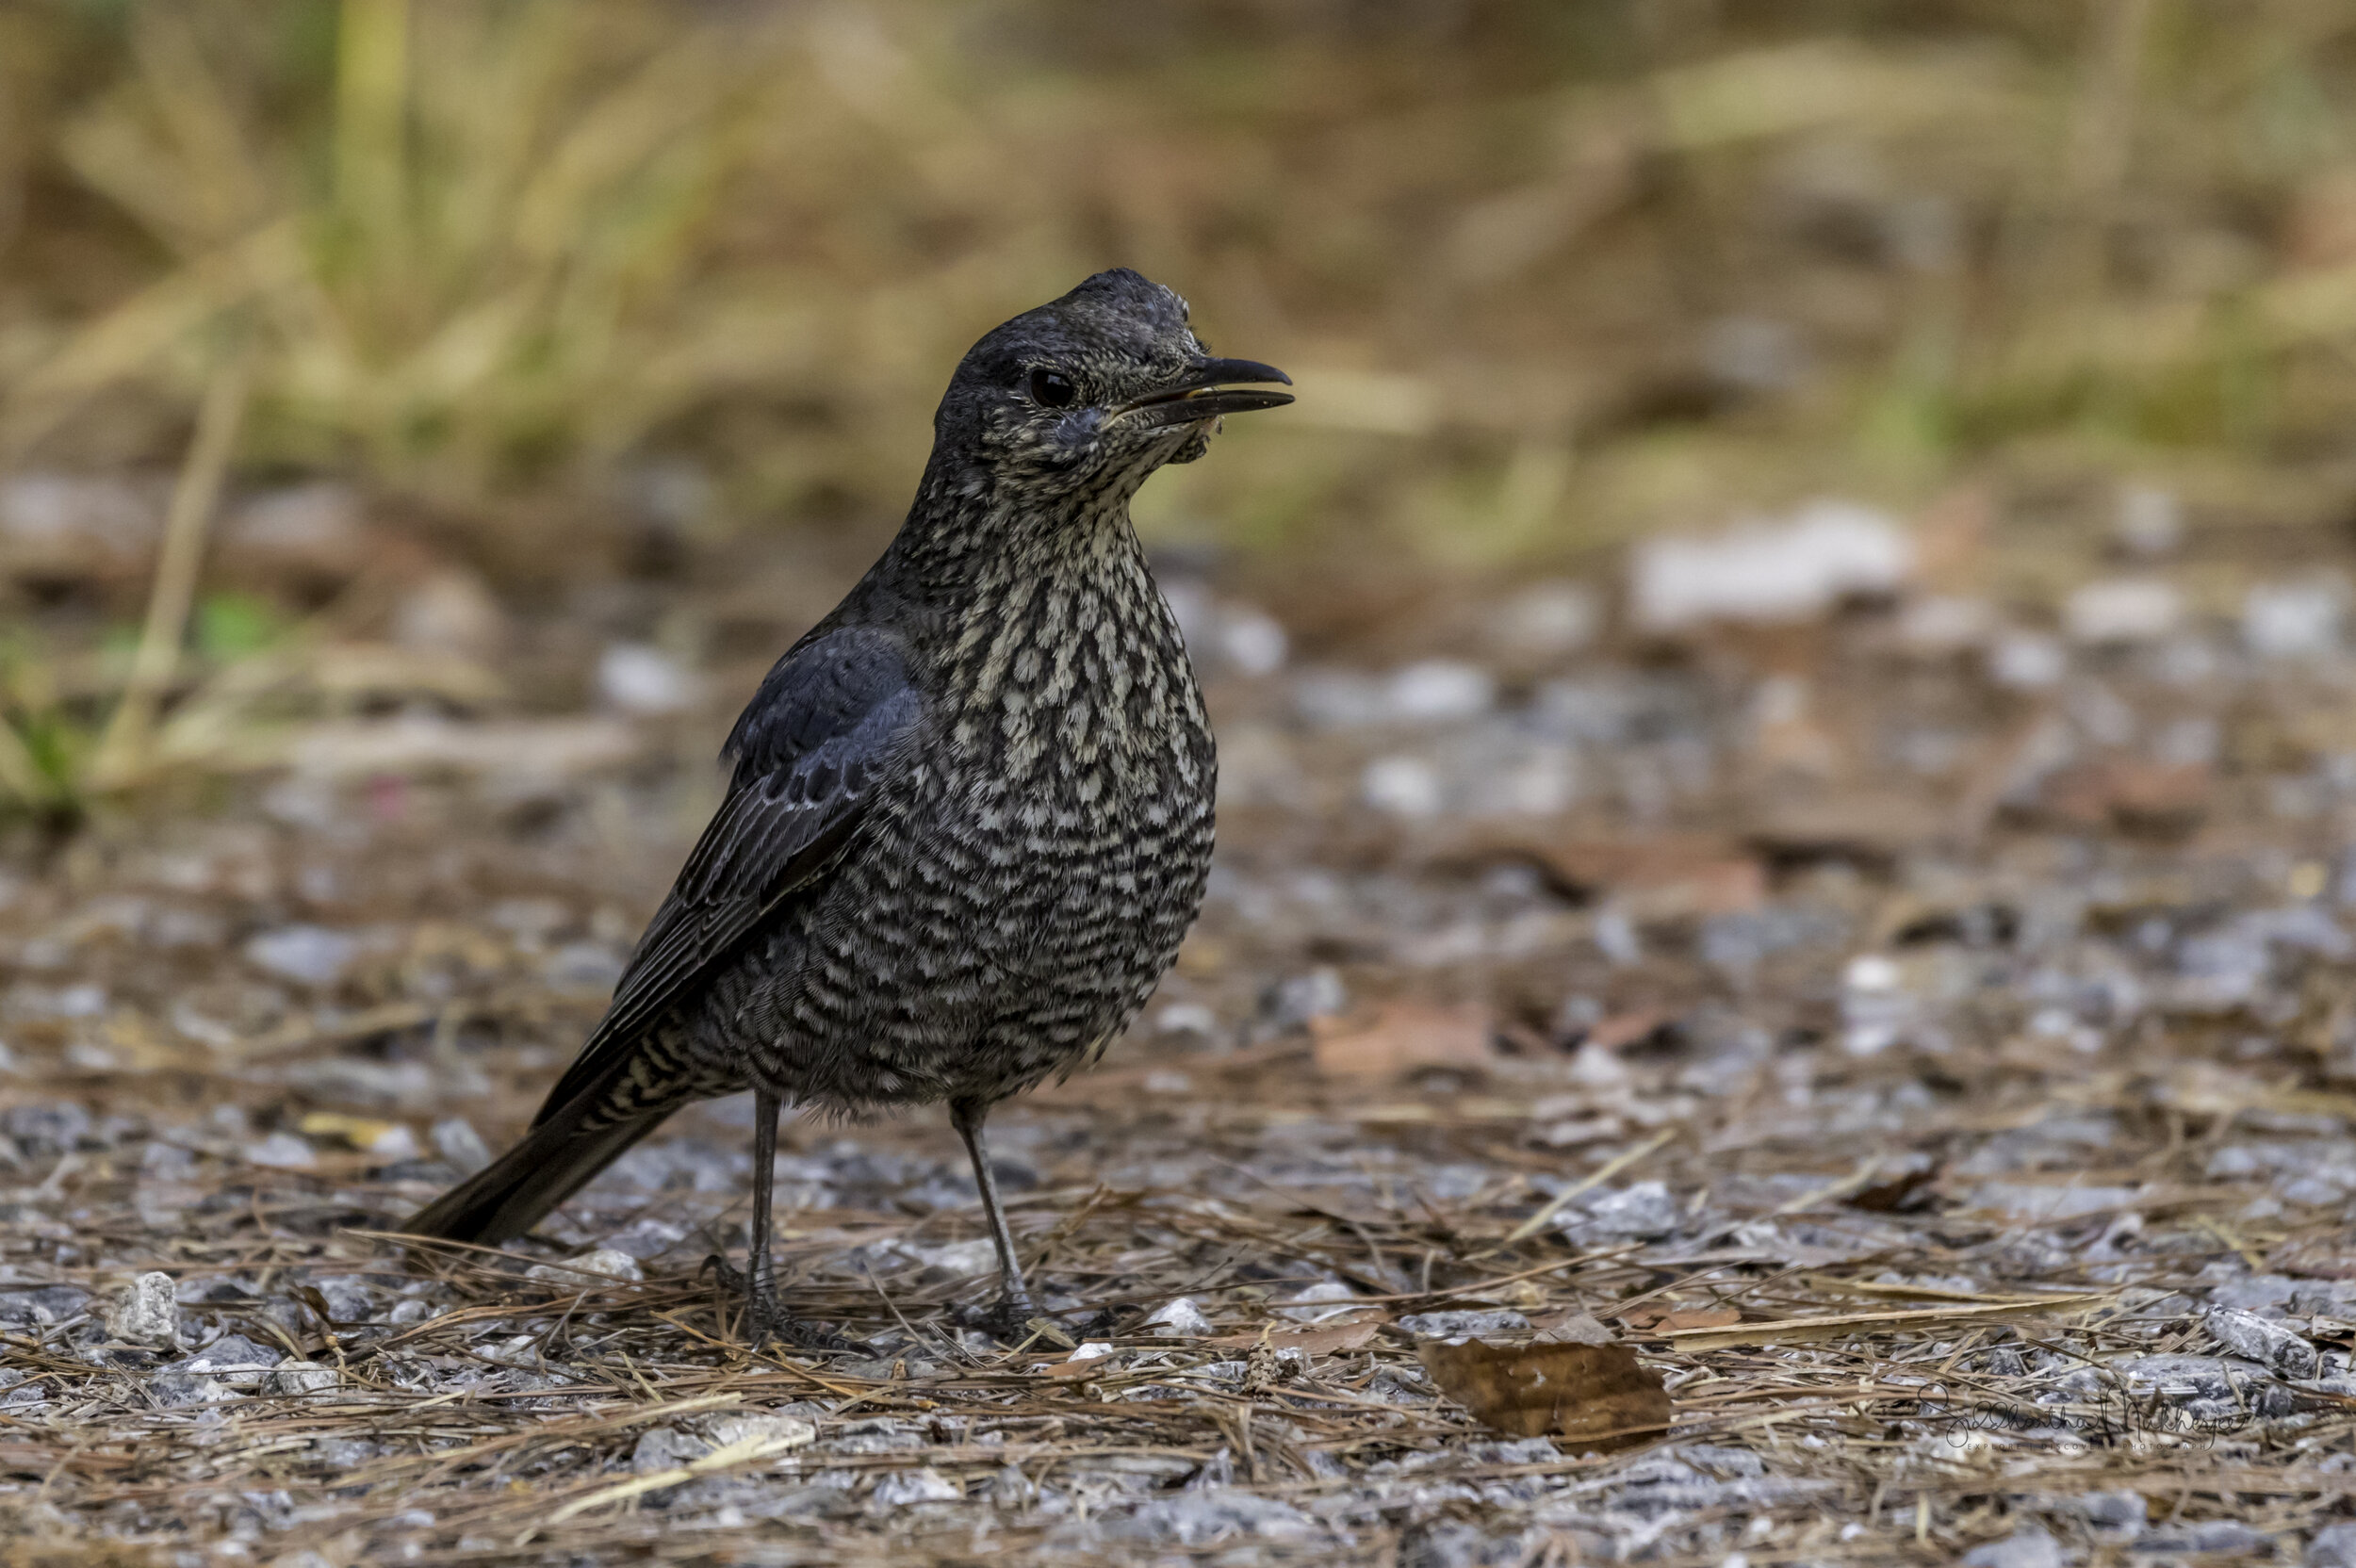  Blue Rock Thrush (Female)  This bird had some infection on its right side causing a swelling over its eye.  